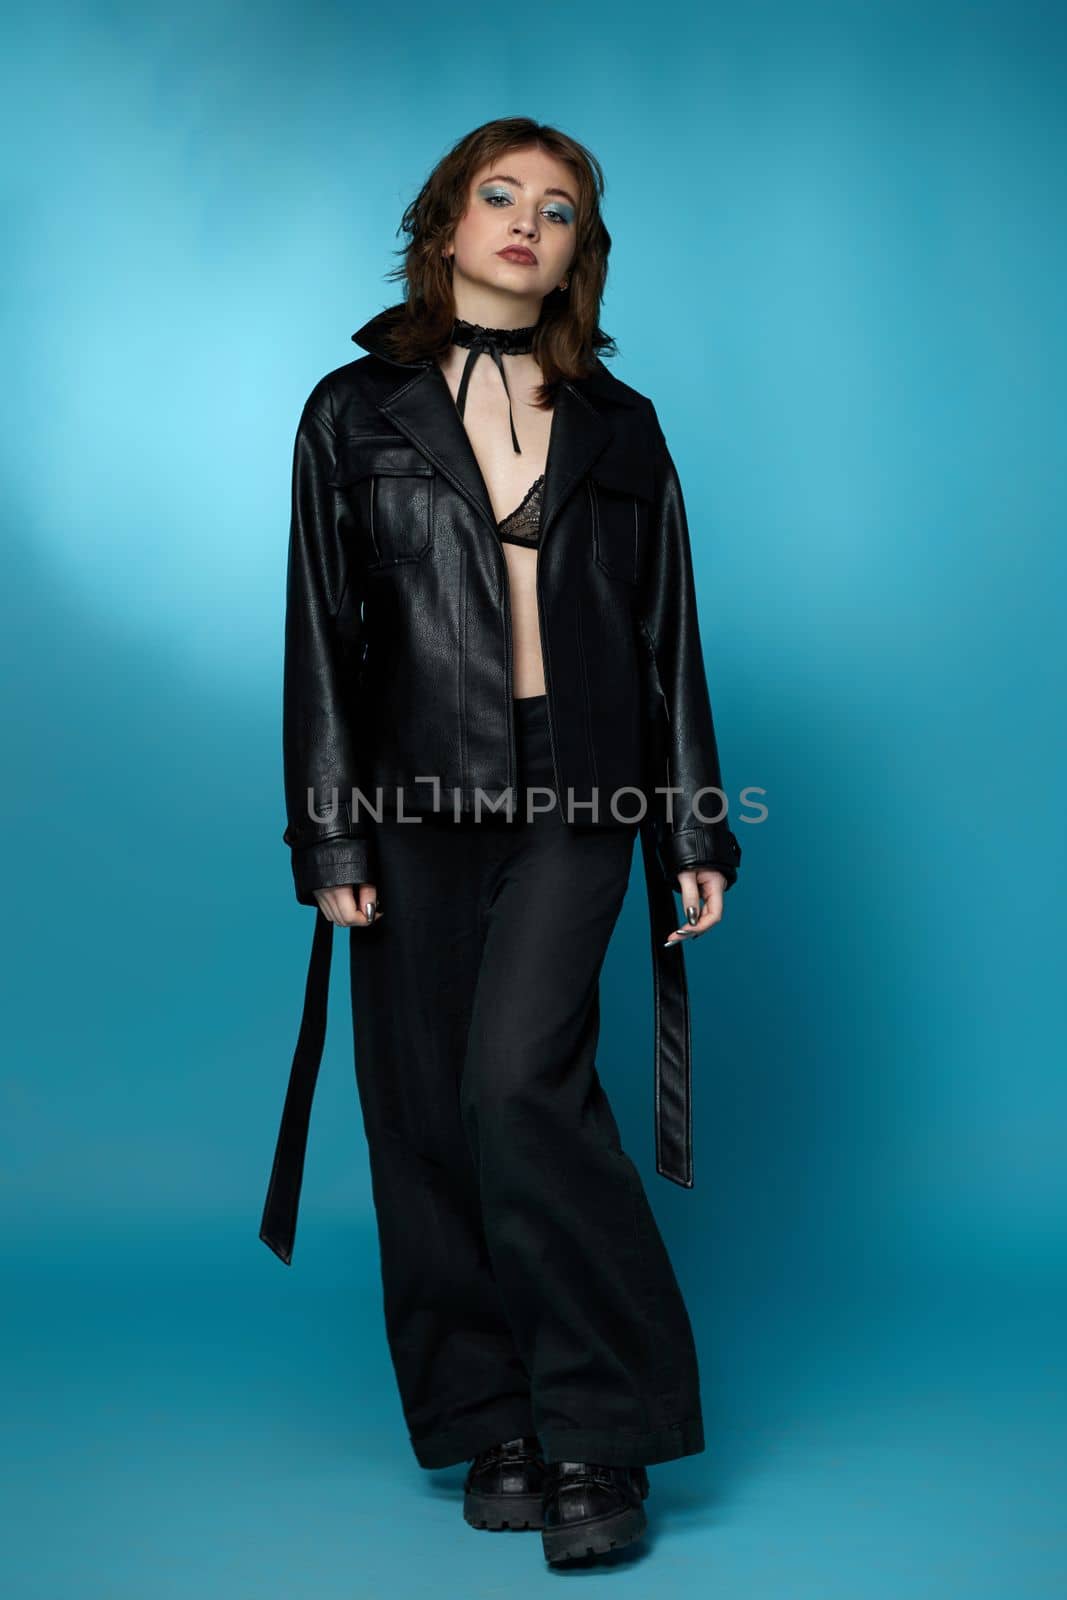 young stylish woman posing in black leather jacket and pants on blue background.